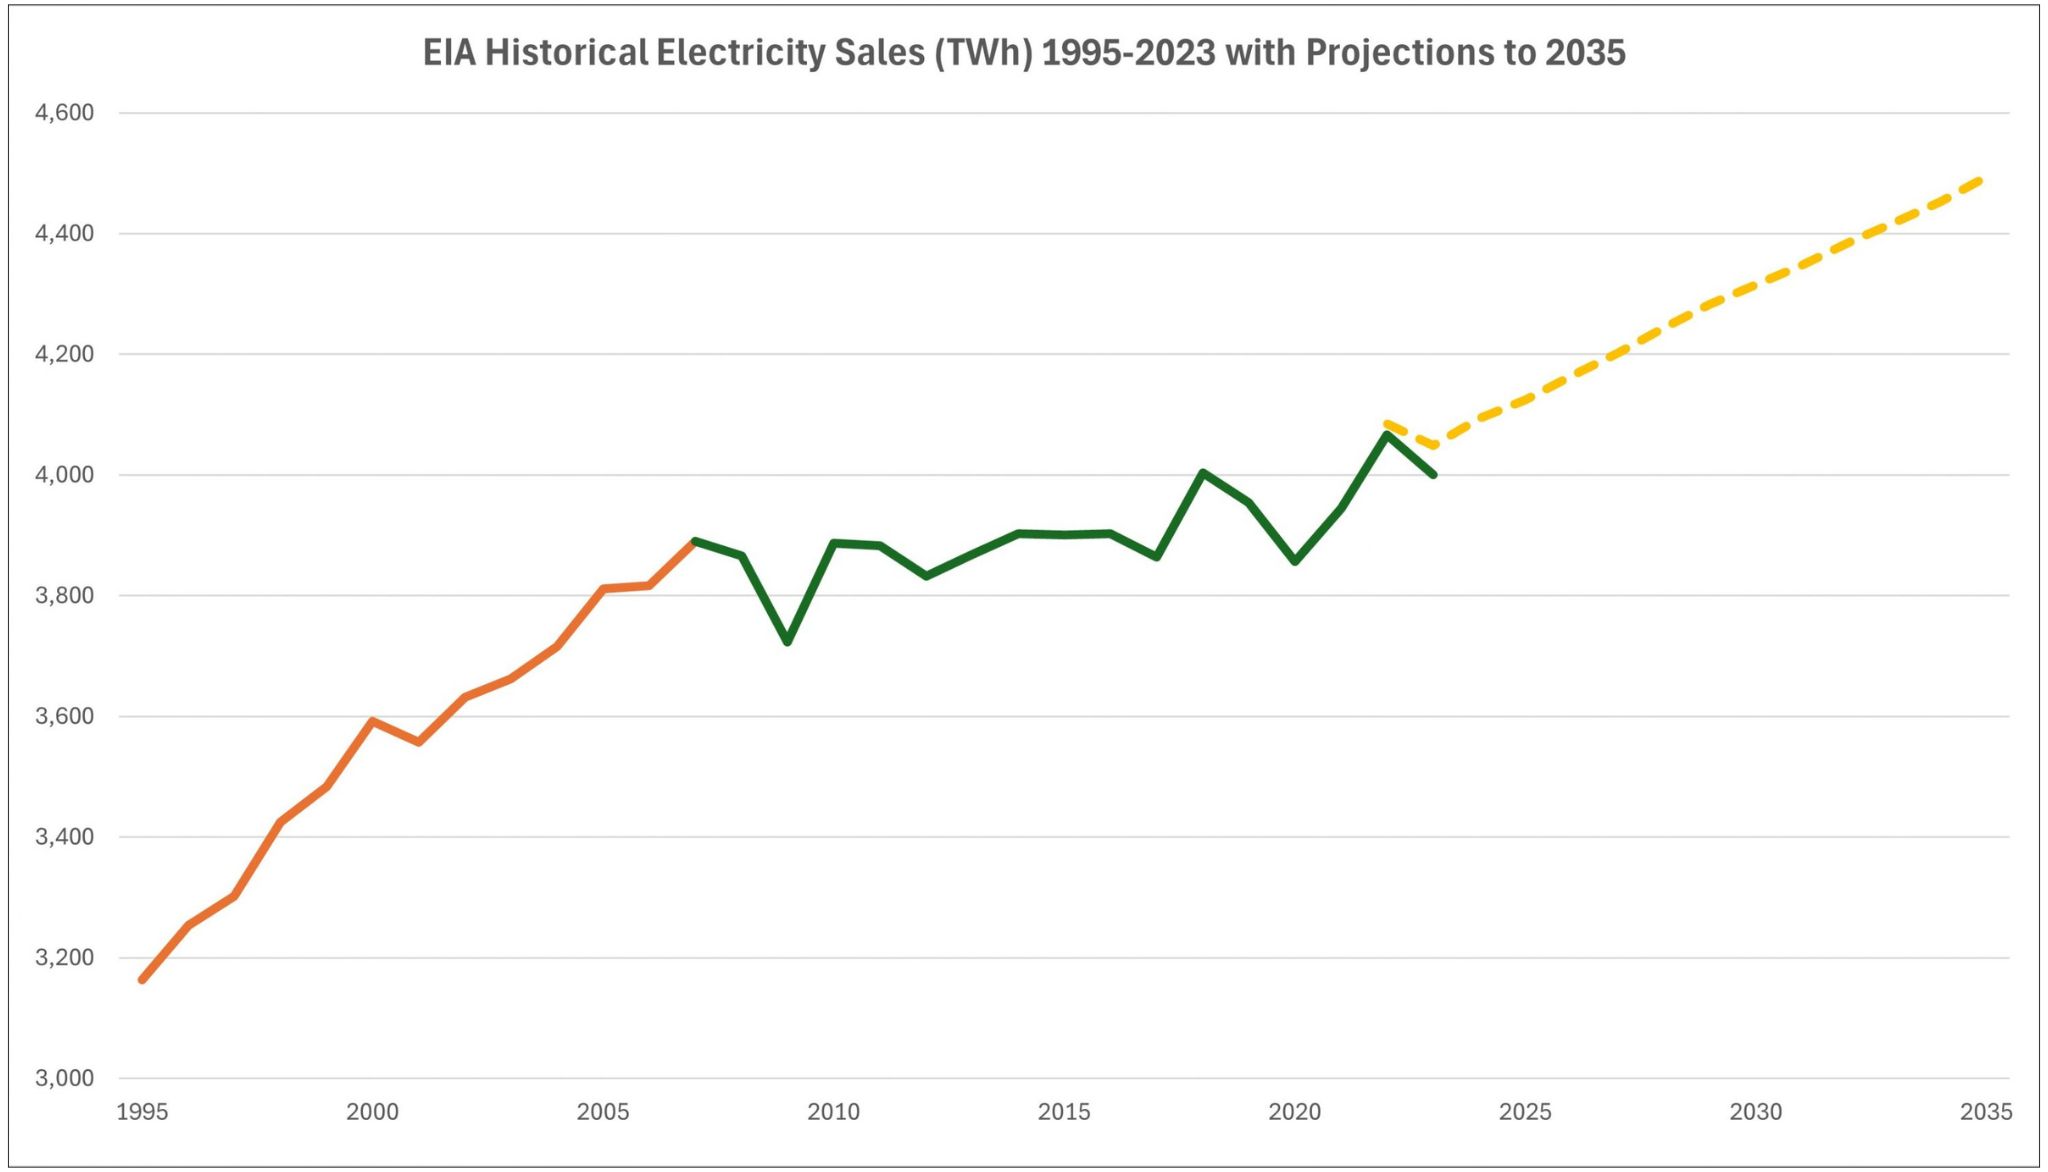 Line chart showing a historical and projected increase in electricity sales from 1995 to 2035.